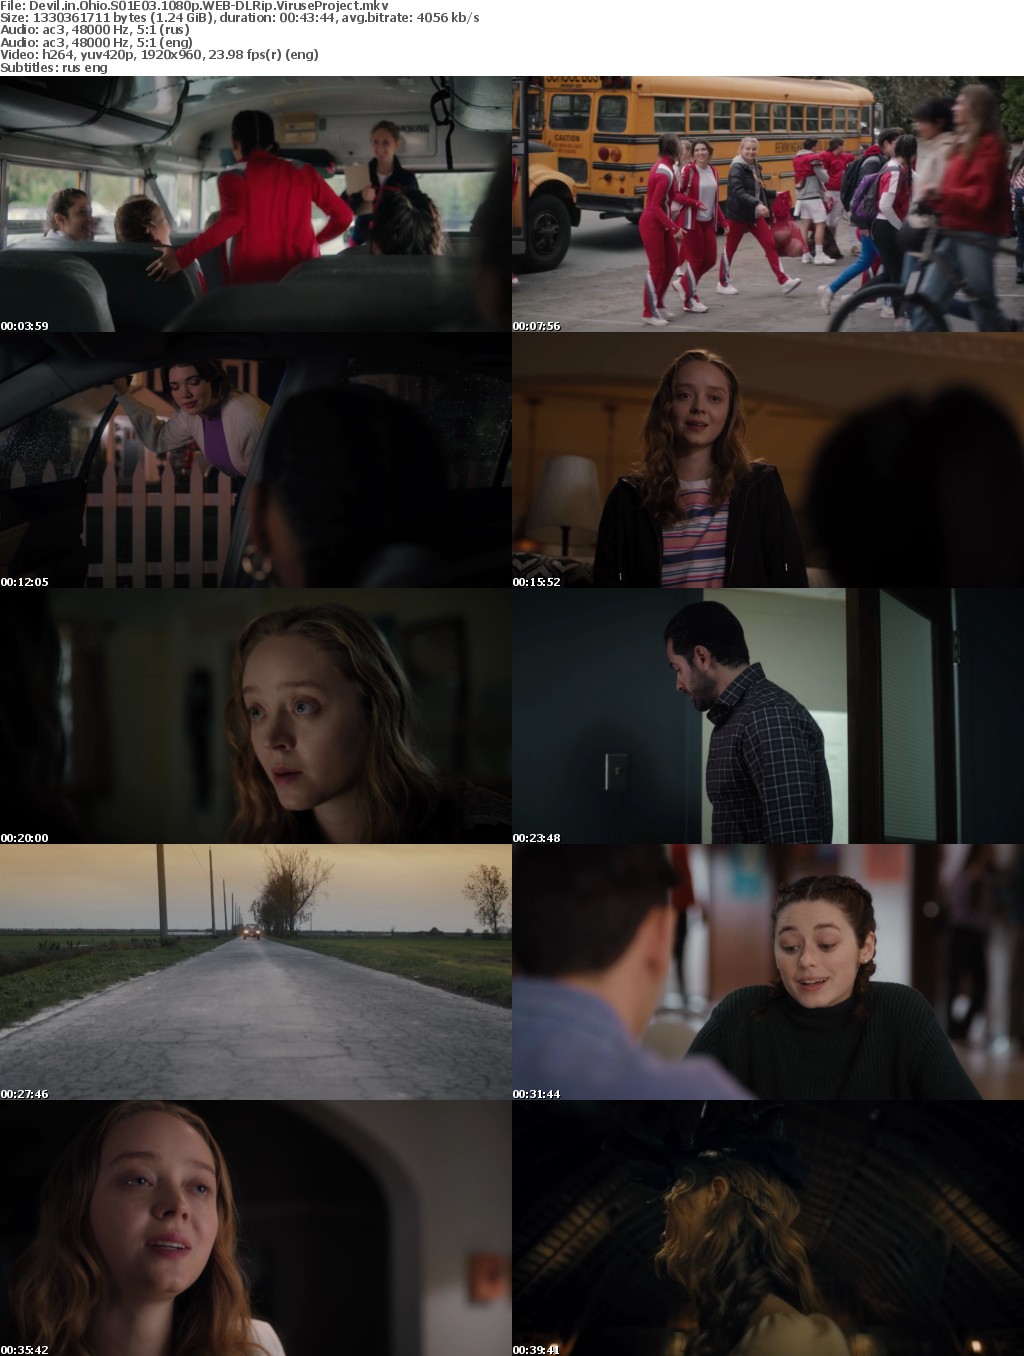 Devil in Ohio S01E01-04 (2022) Rus Eng (Rus Eng Subs) WEB-DLRip ViruseProjectDevil in Ohio S01E01-04 (2022) Rus Eng (Rus Eng Subs) 1080 WEB-DLRip ViruseProject